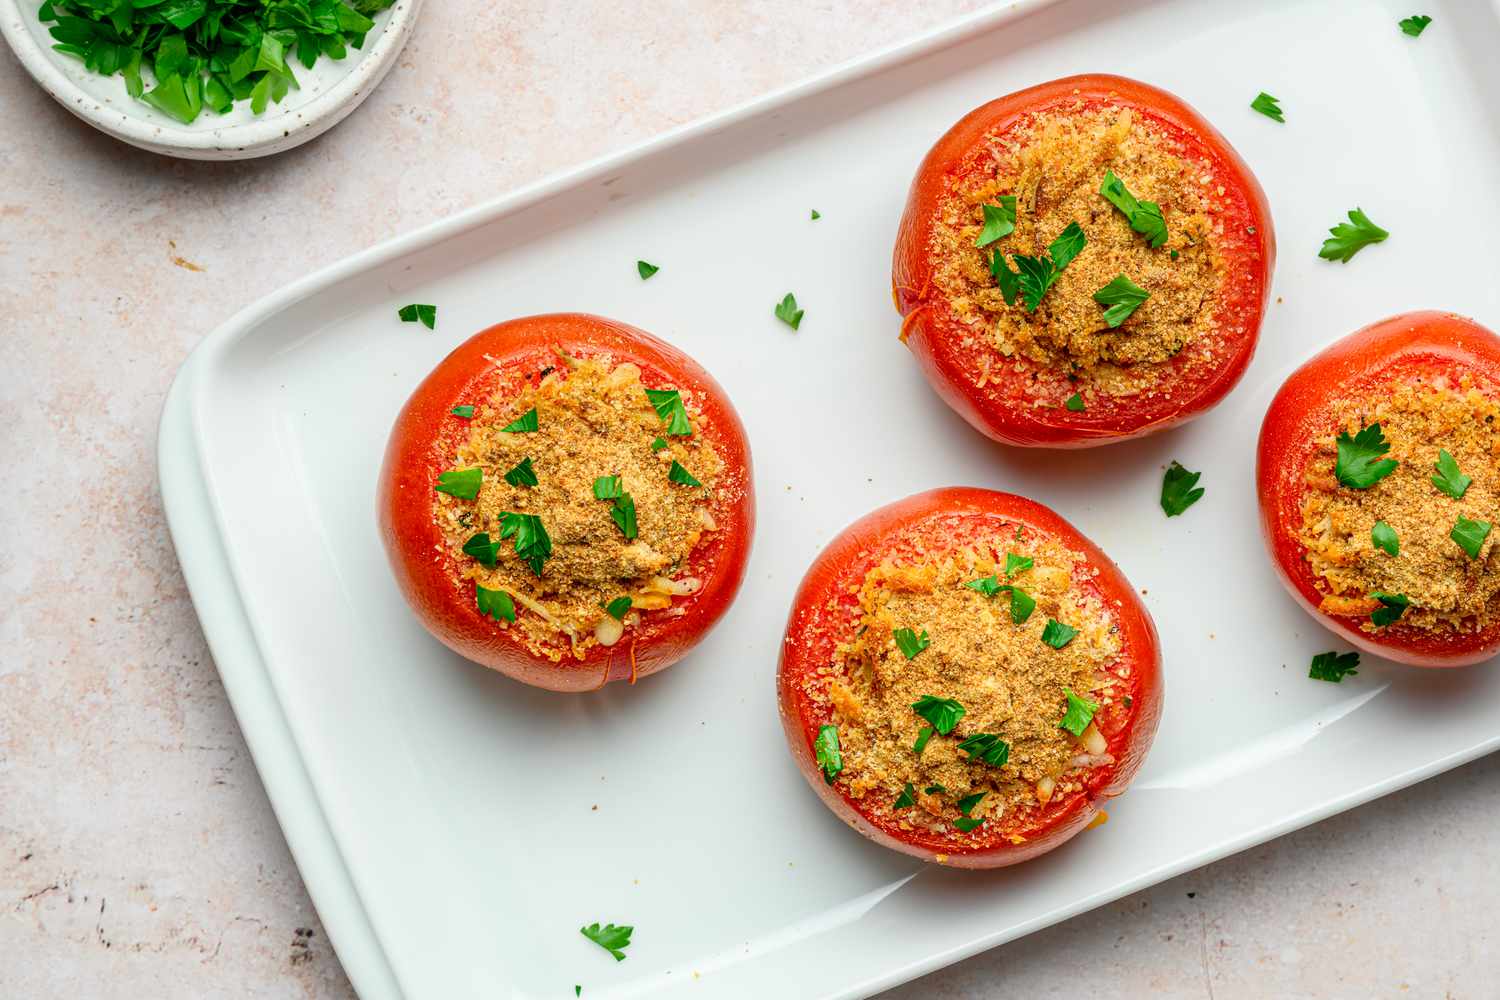 A tray of four stuffed tomatoes topped with chopped parsley